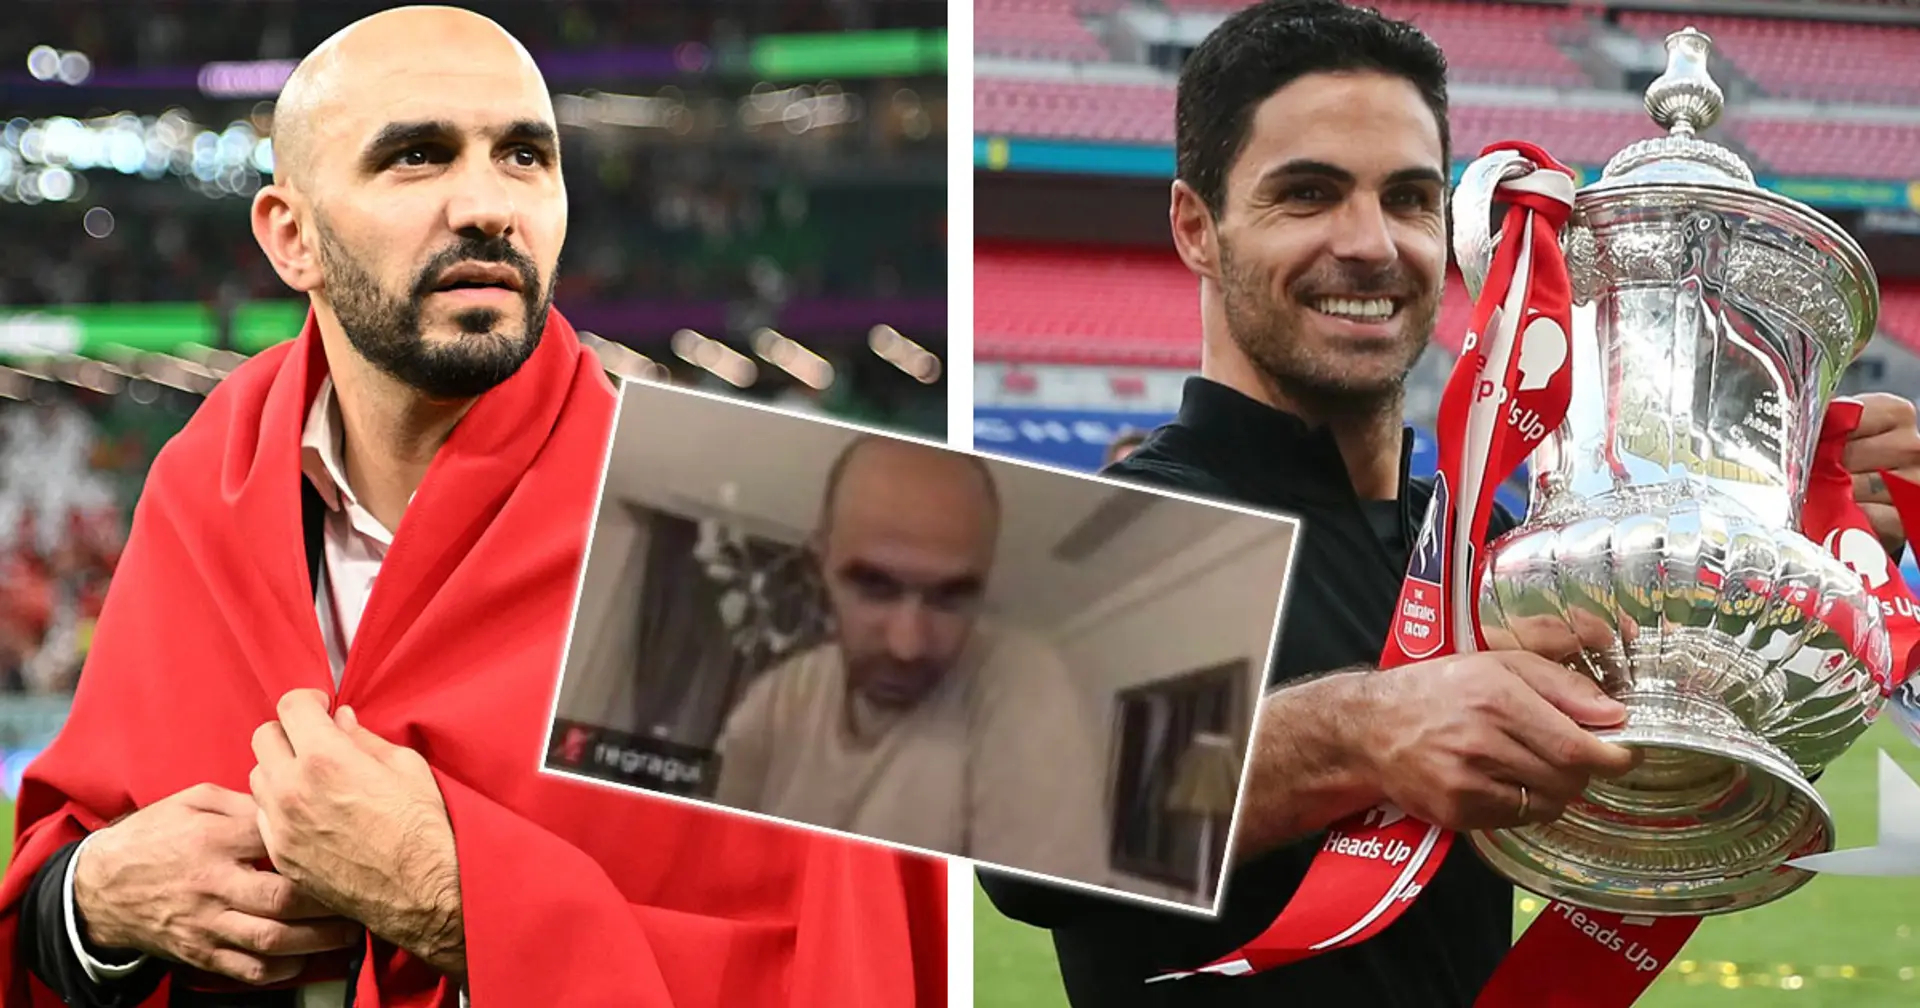 Explained: story of how Arteta inspired Morocco coach Walid Regargui before World Cup success